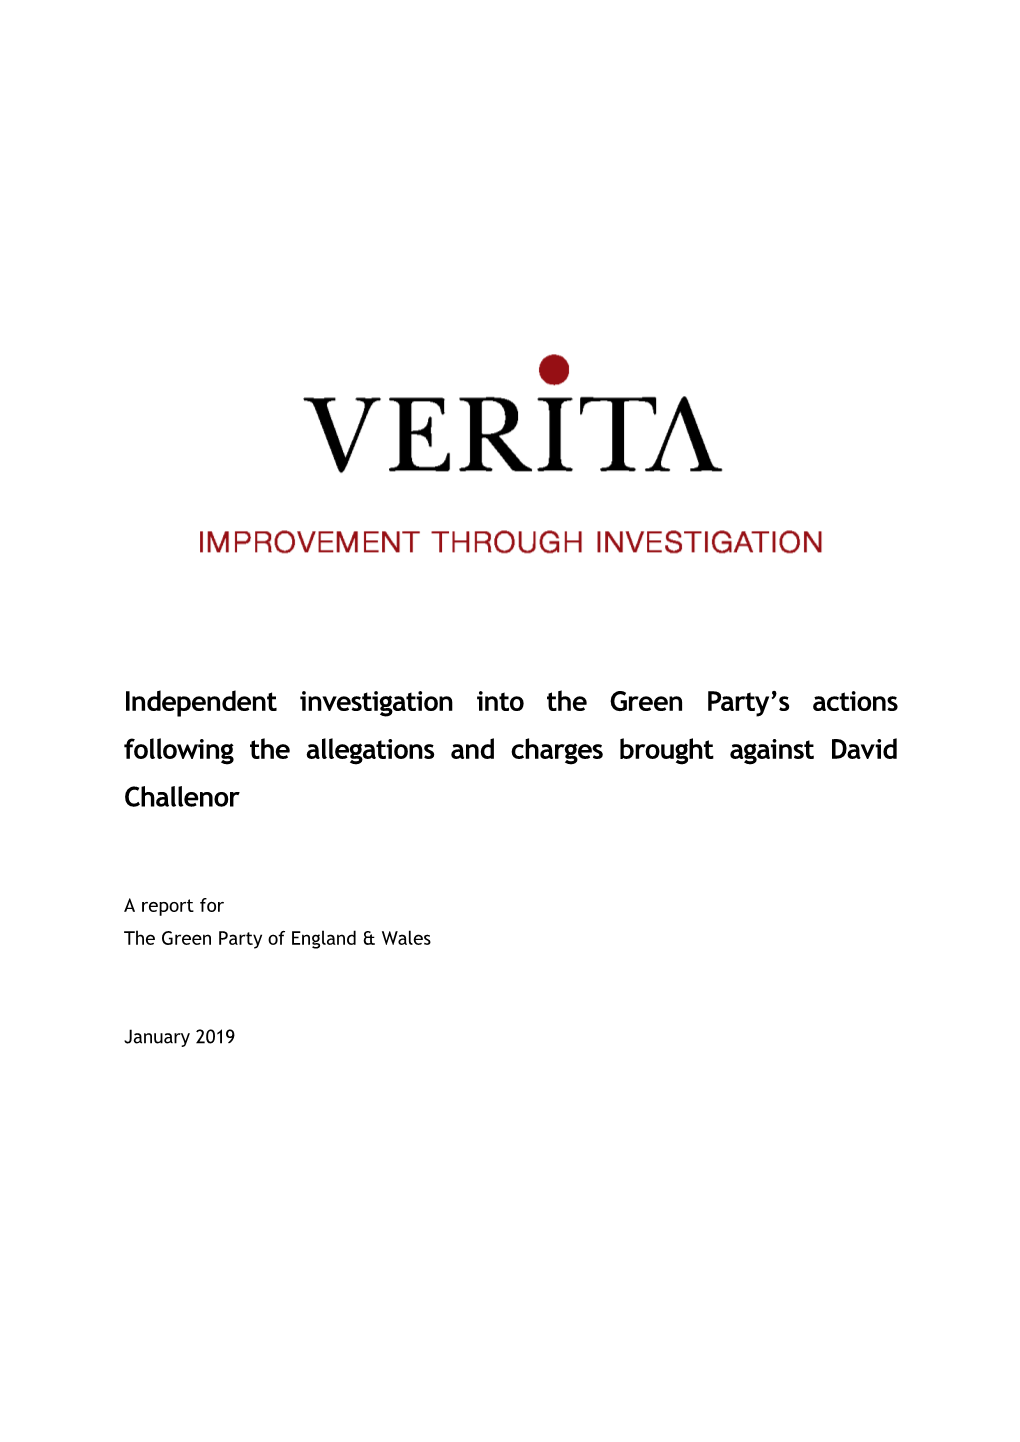 Independent Investigation Into the Green Party's Actions Following The